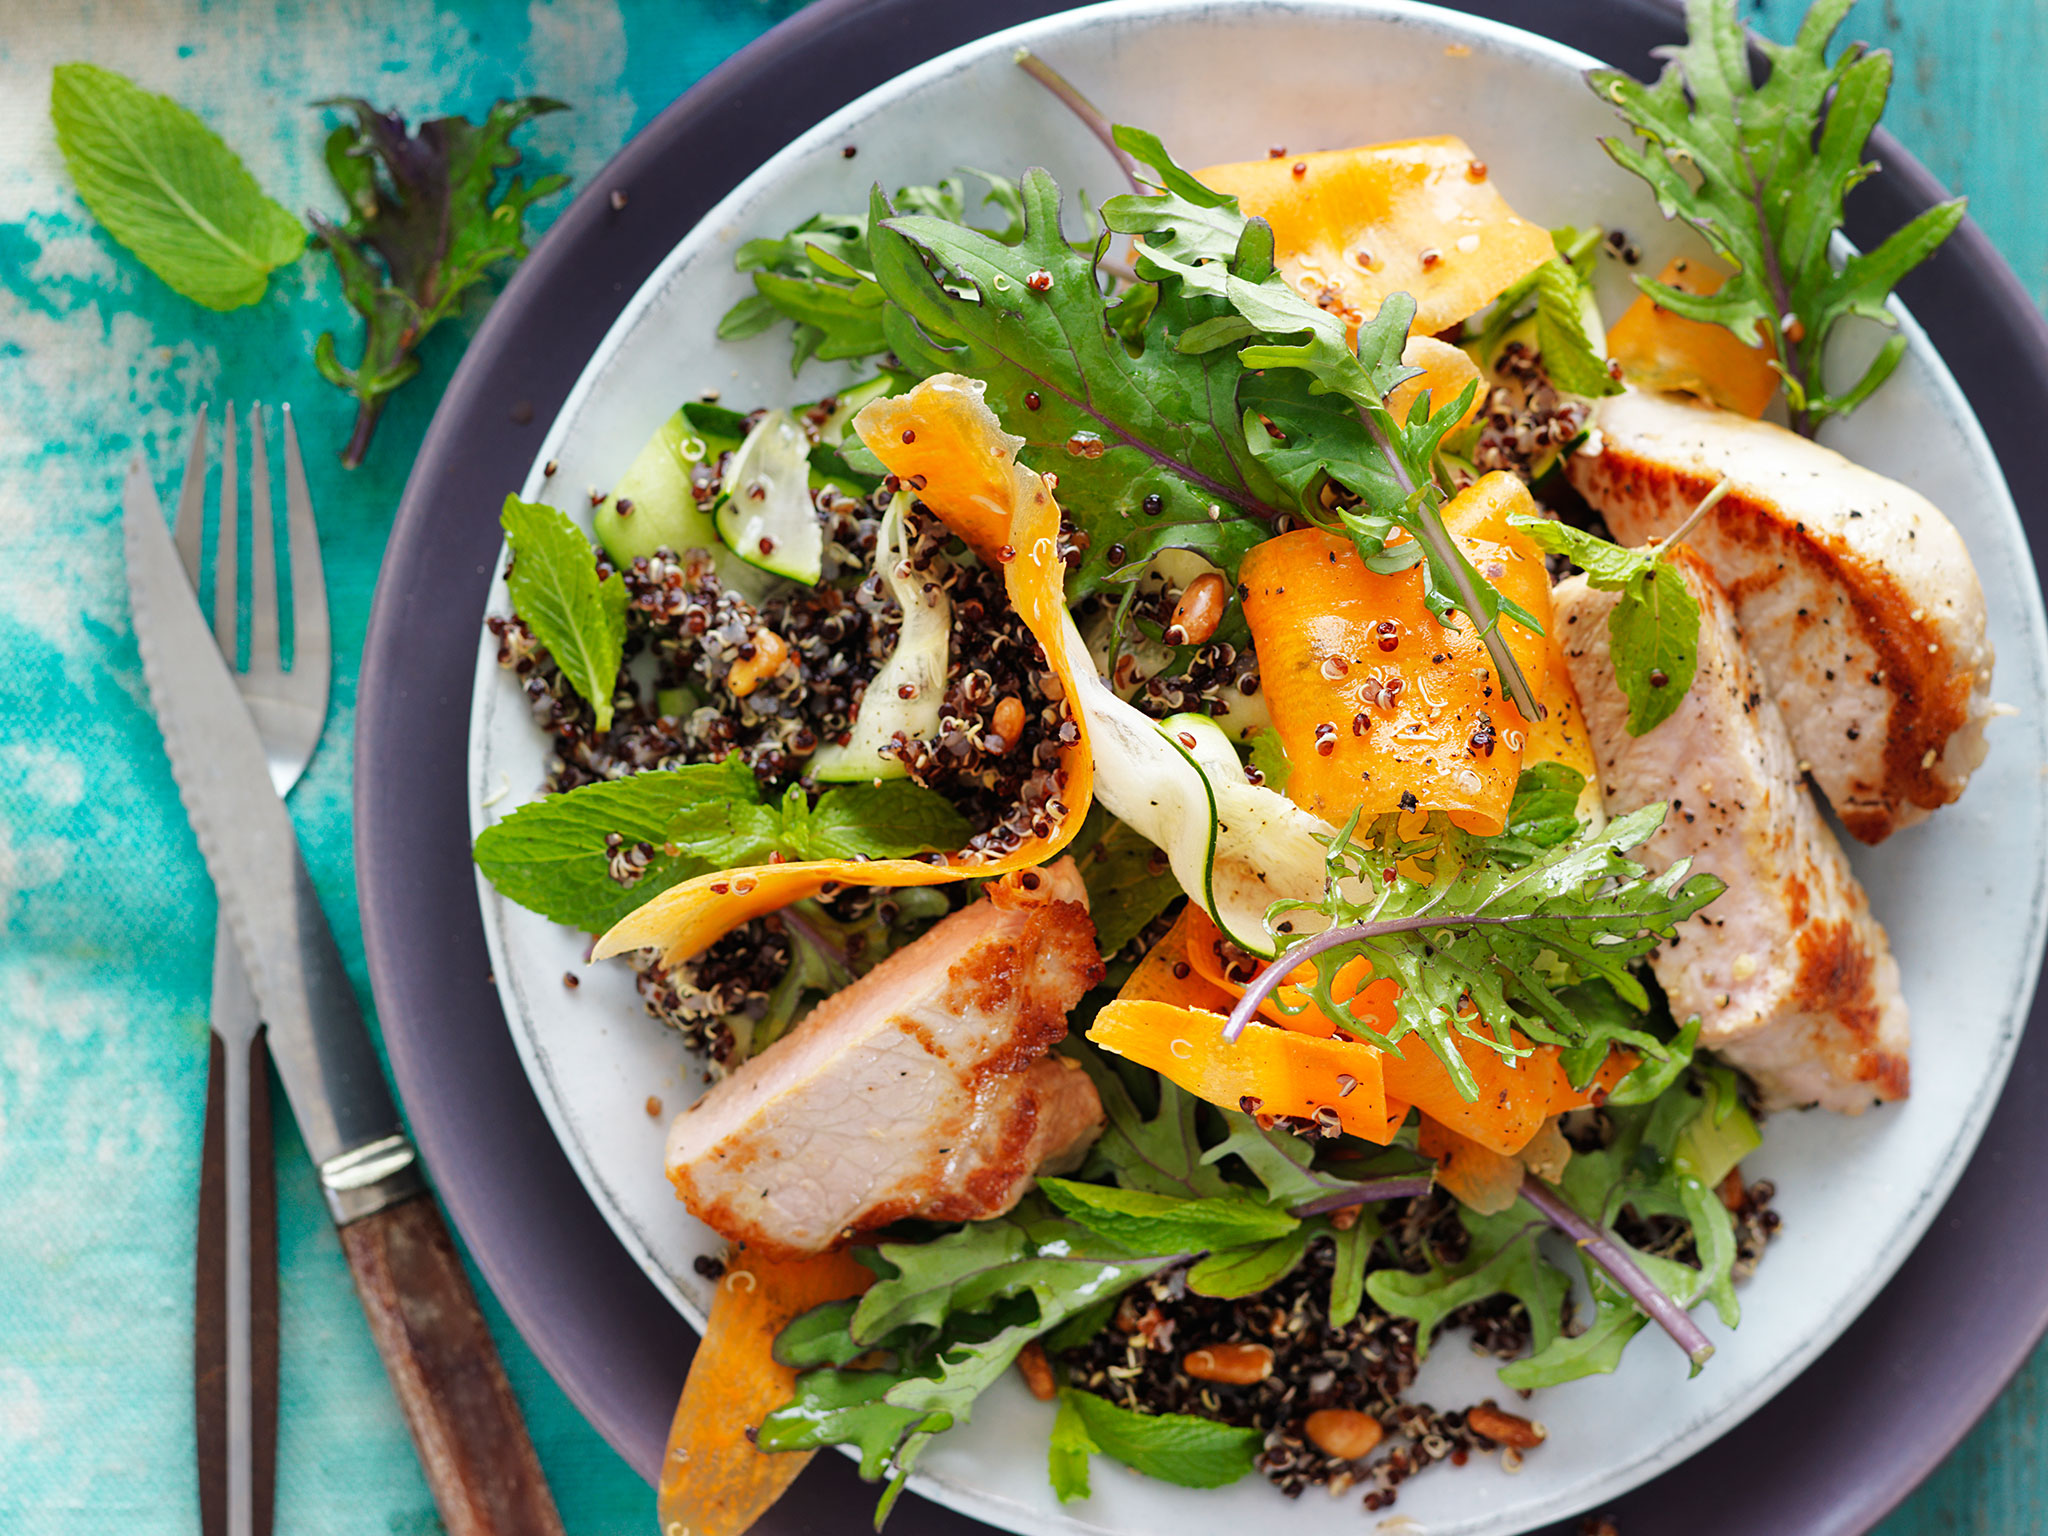 Grilled pork with quinoa and kale salad